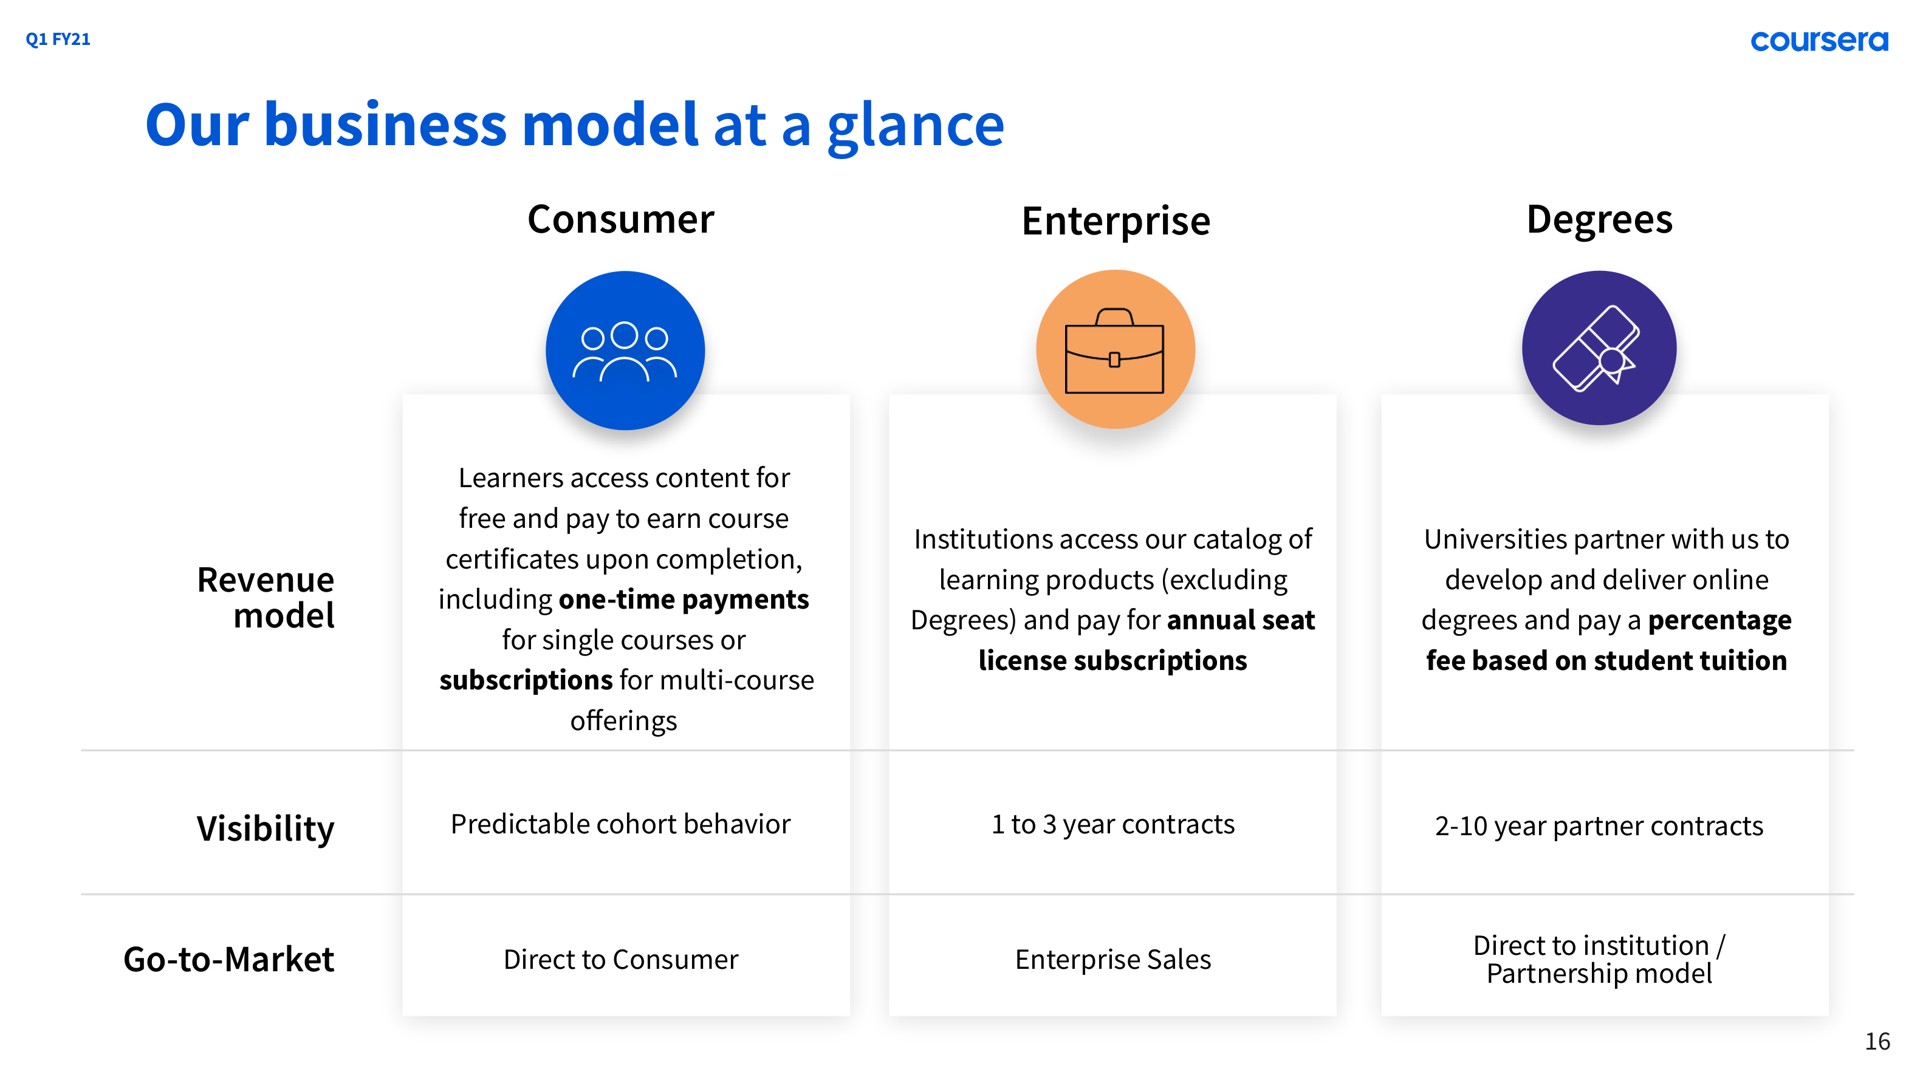 our business model at a glance | Coursera